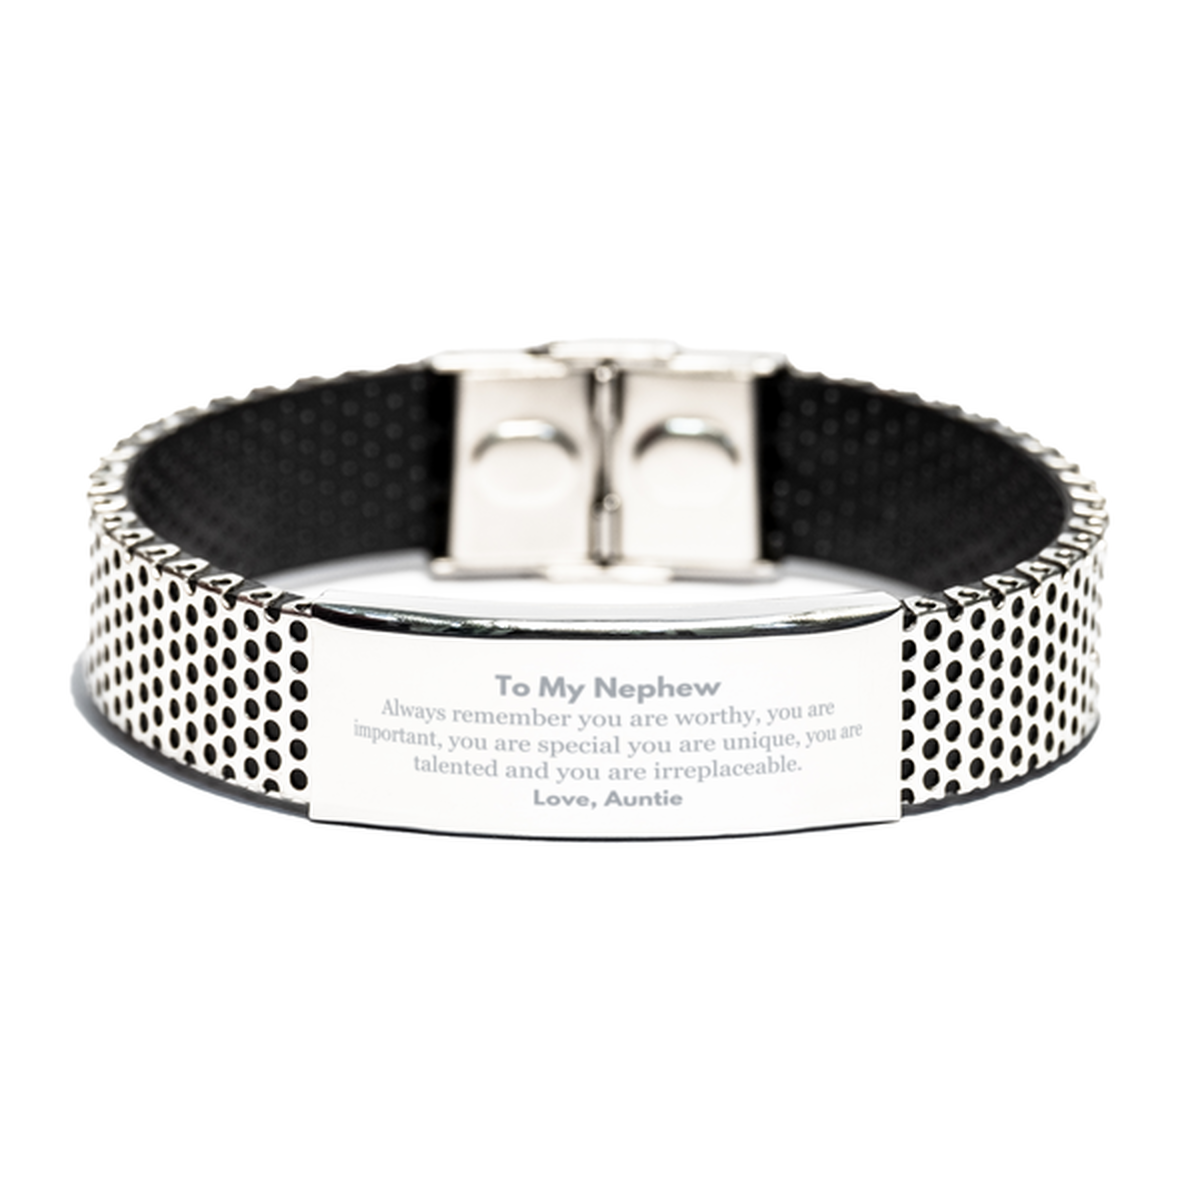 Nephew Birthday Gifts from Auntie, Inspirational Stainless Steel Bracelet for Nephew Christmas Graduation Gifts for Nephew Always remember you are worthy, you are important. Love, Auntie